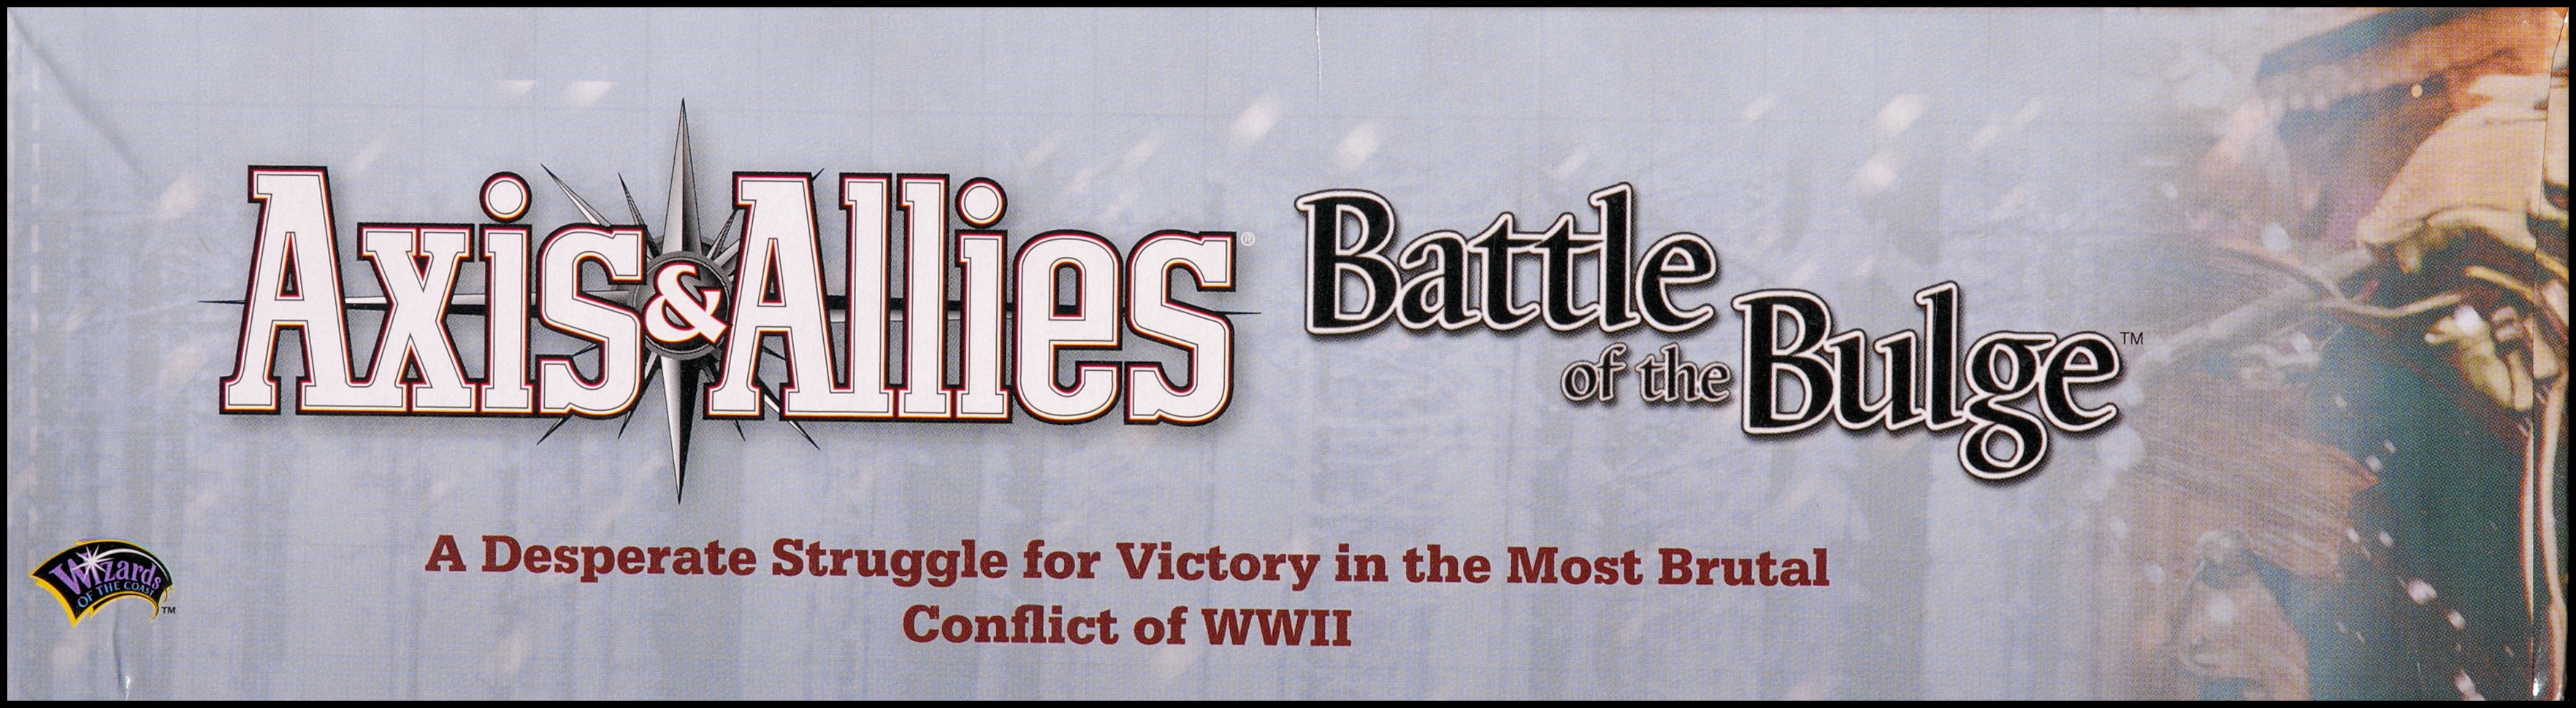 Axis & Allies: Battle Of The Bulge - Outside Box Side 1